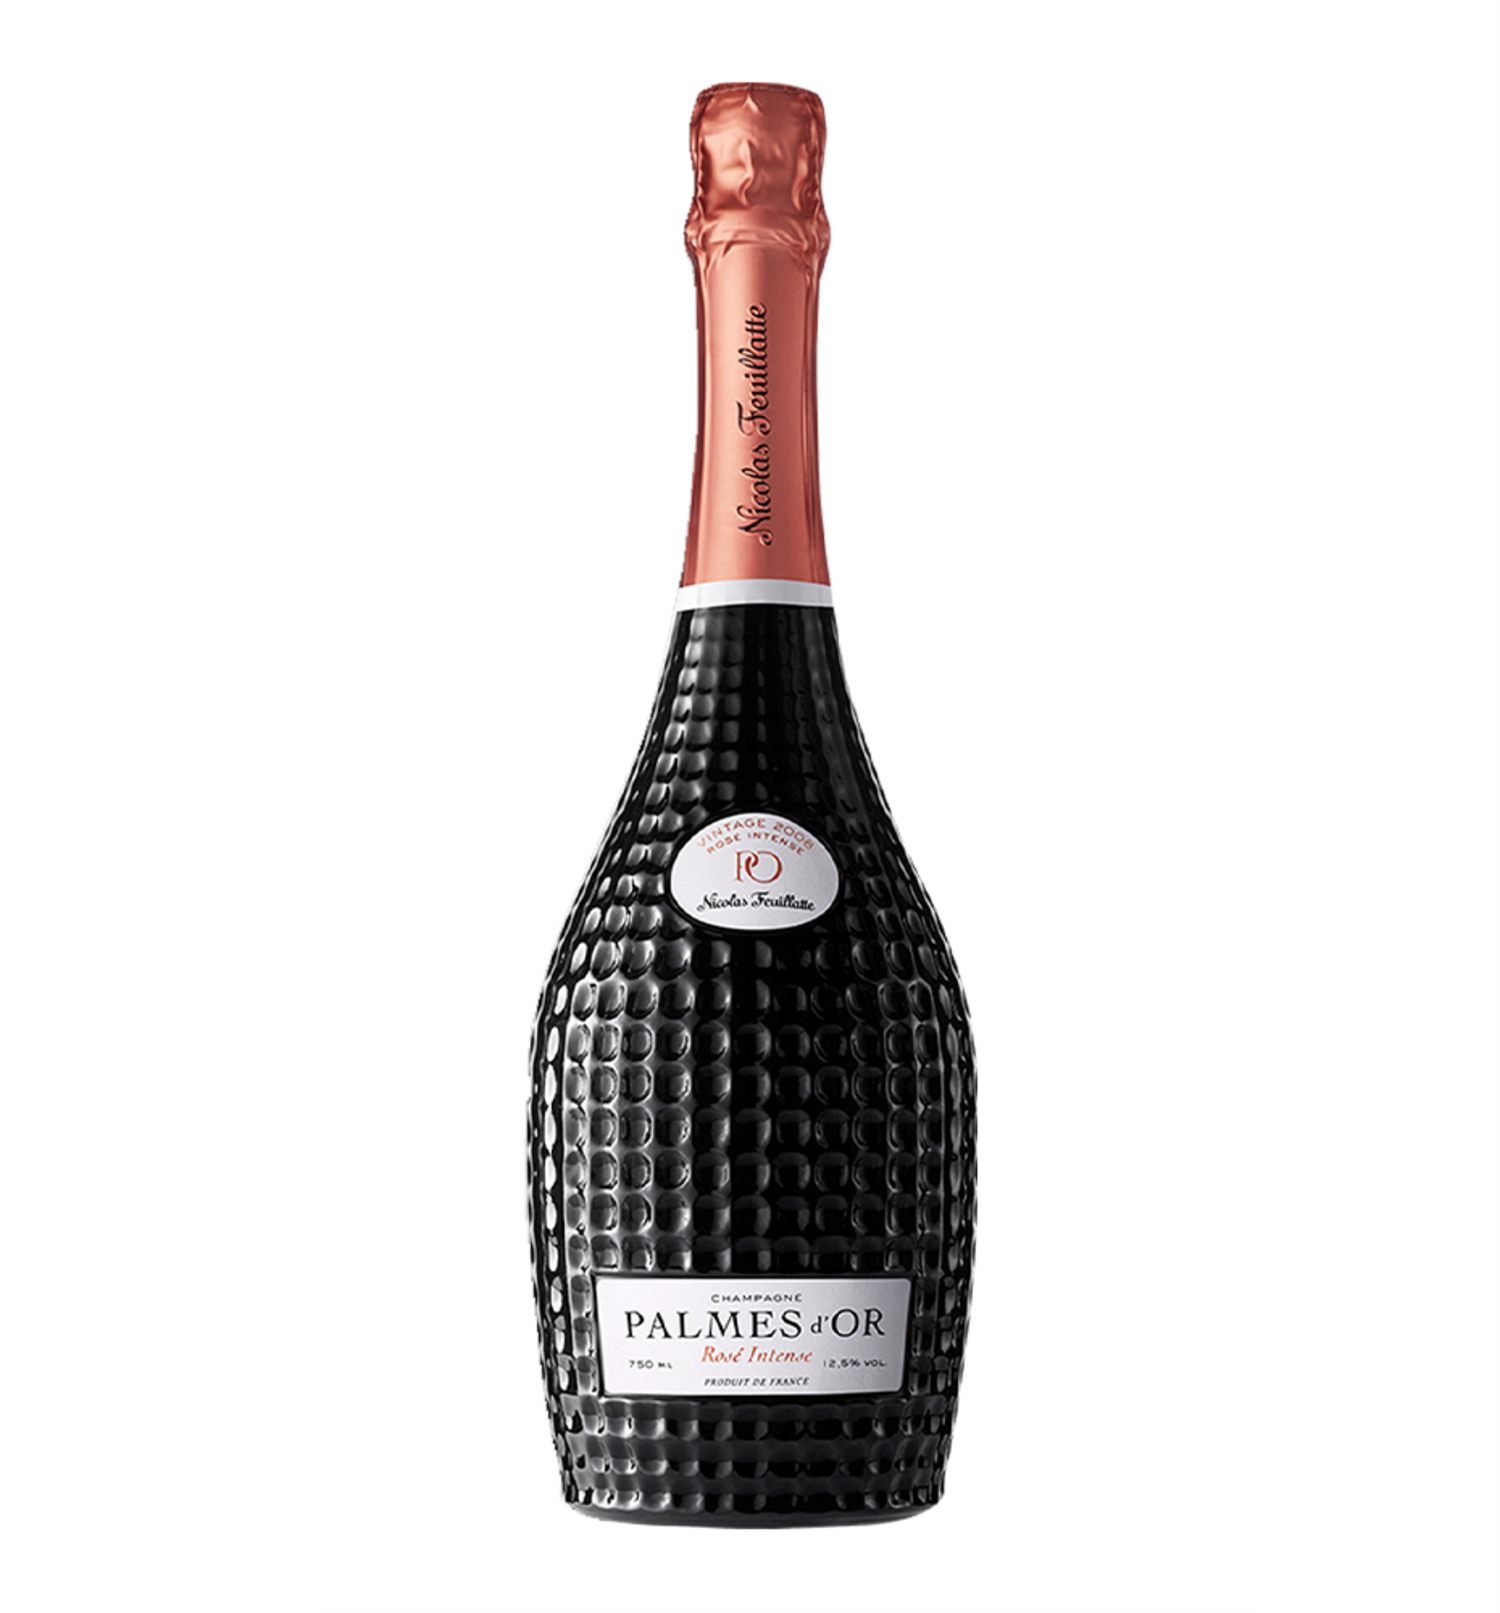 - Nicolas 2008 Fossil D`or Wine&Spirits Vintage 750ml Intense Champagne Uncle Feuillatte Palmes Rose